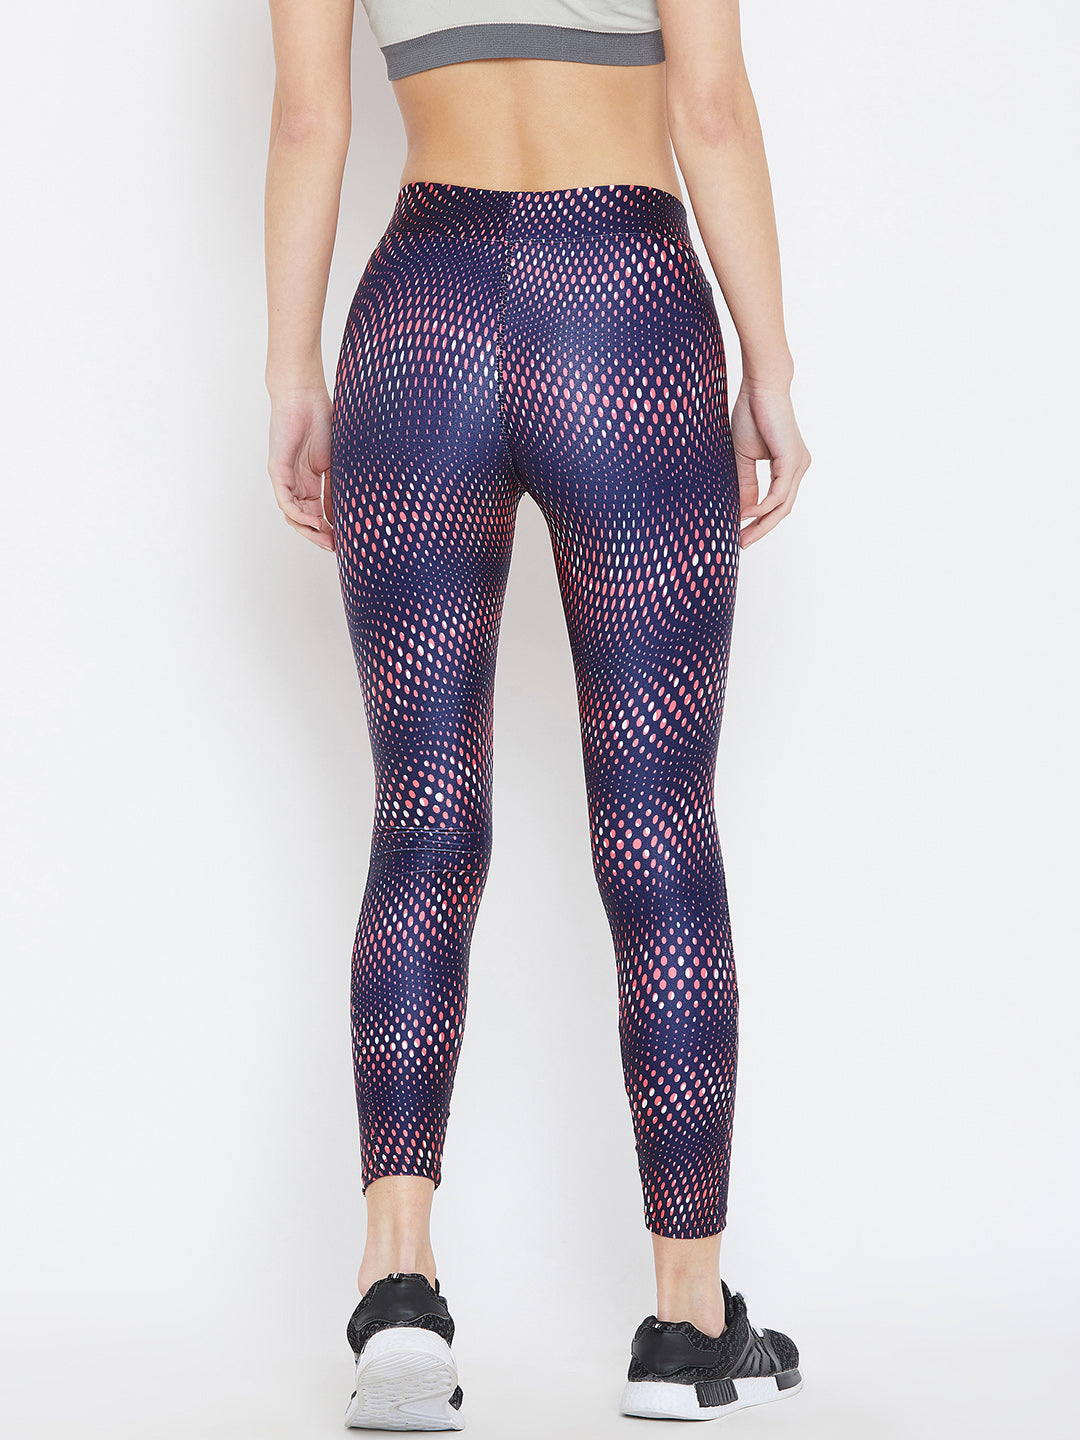 Printed Women Red Tights.